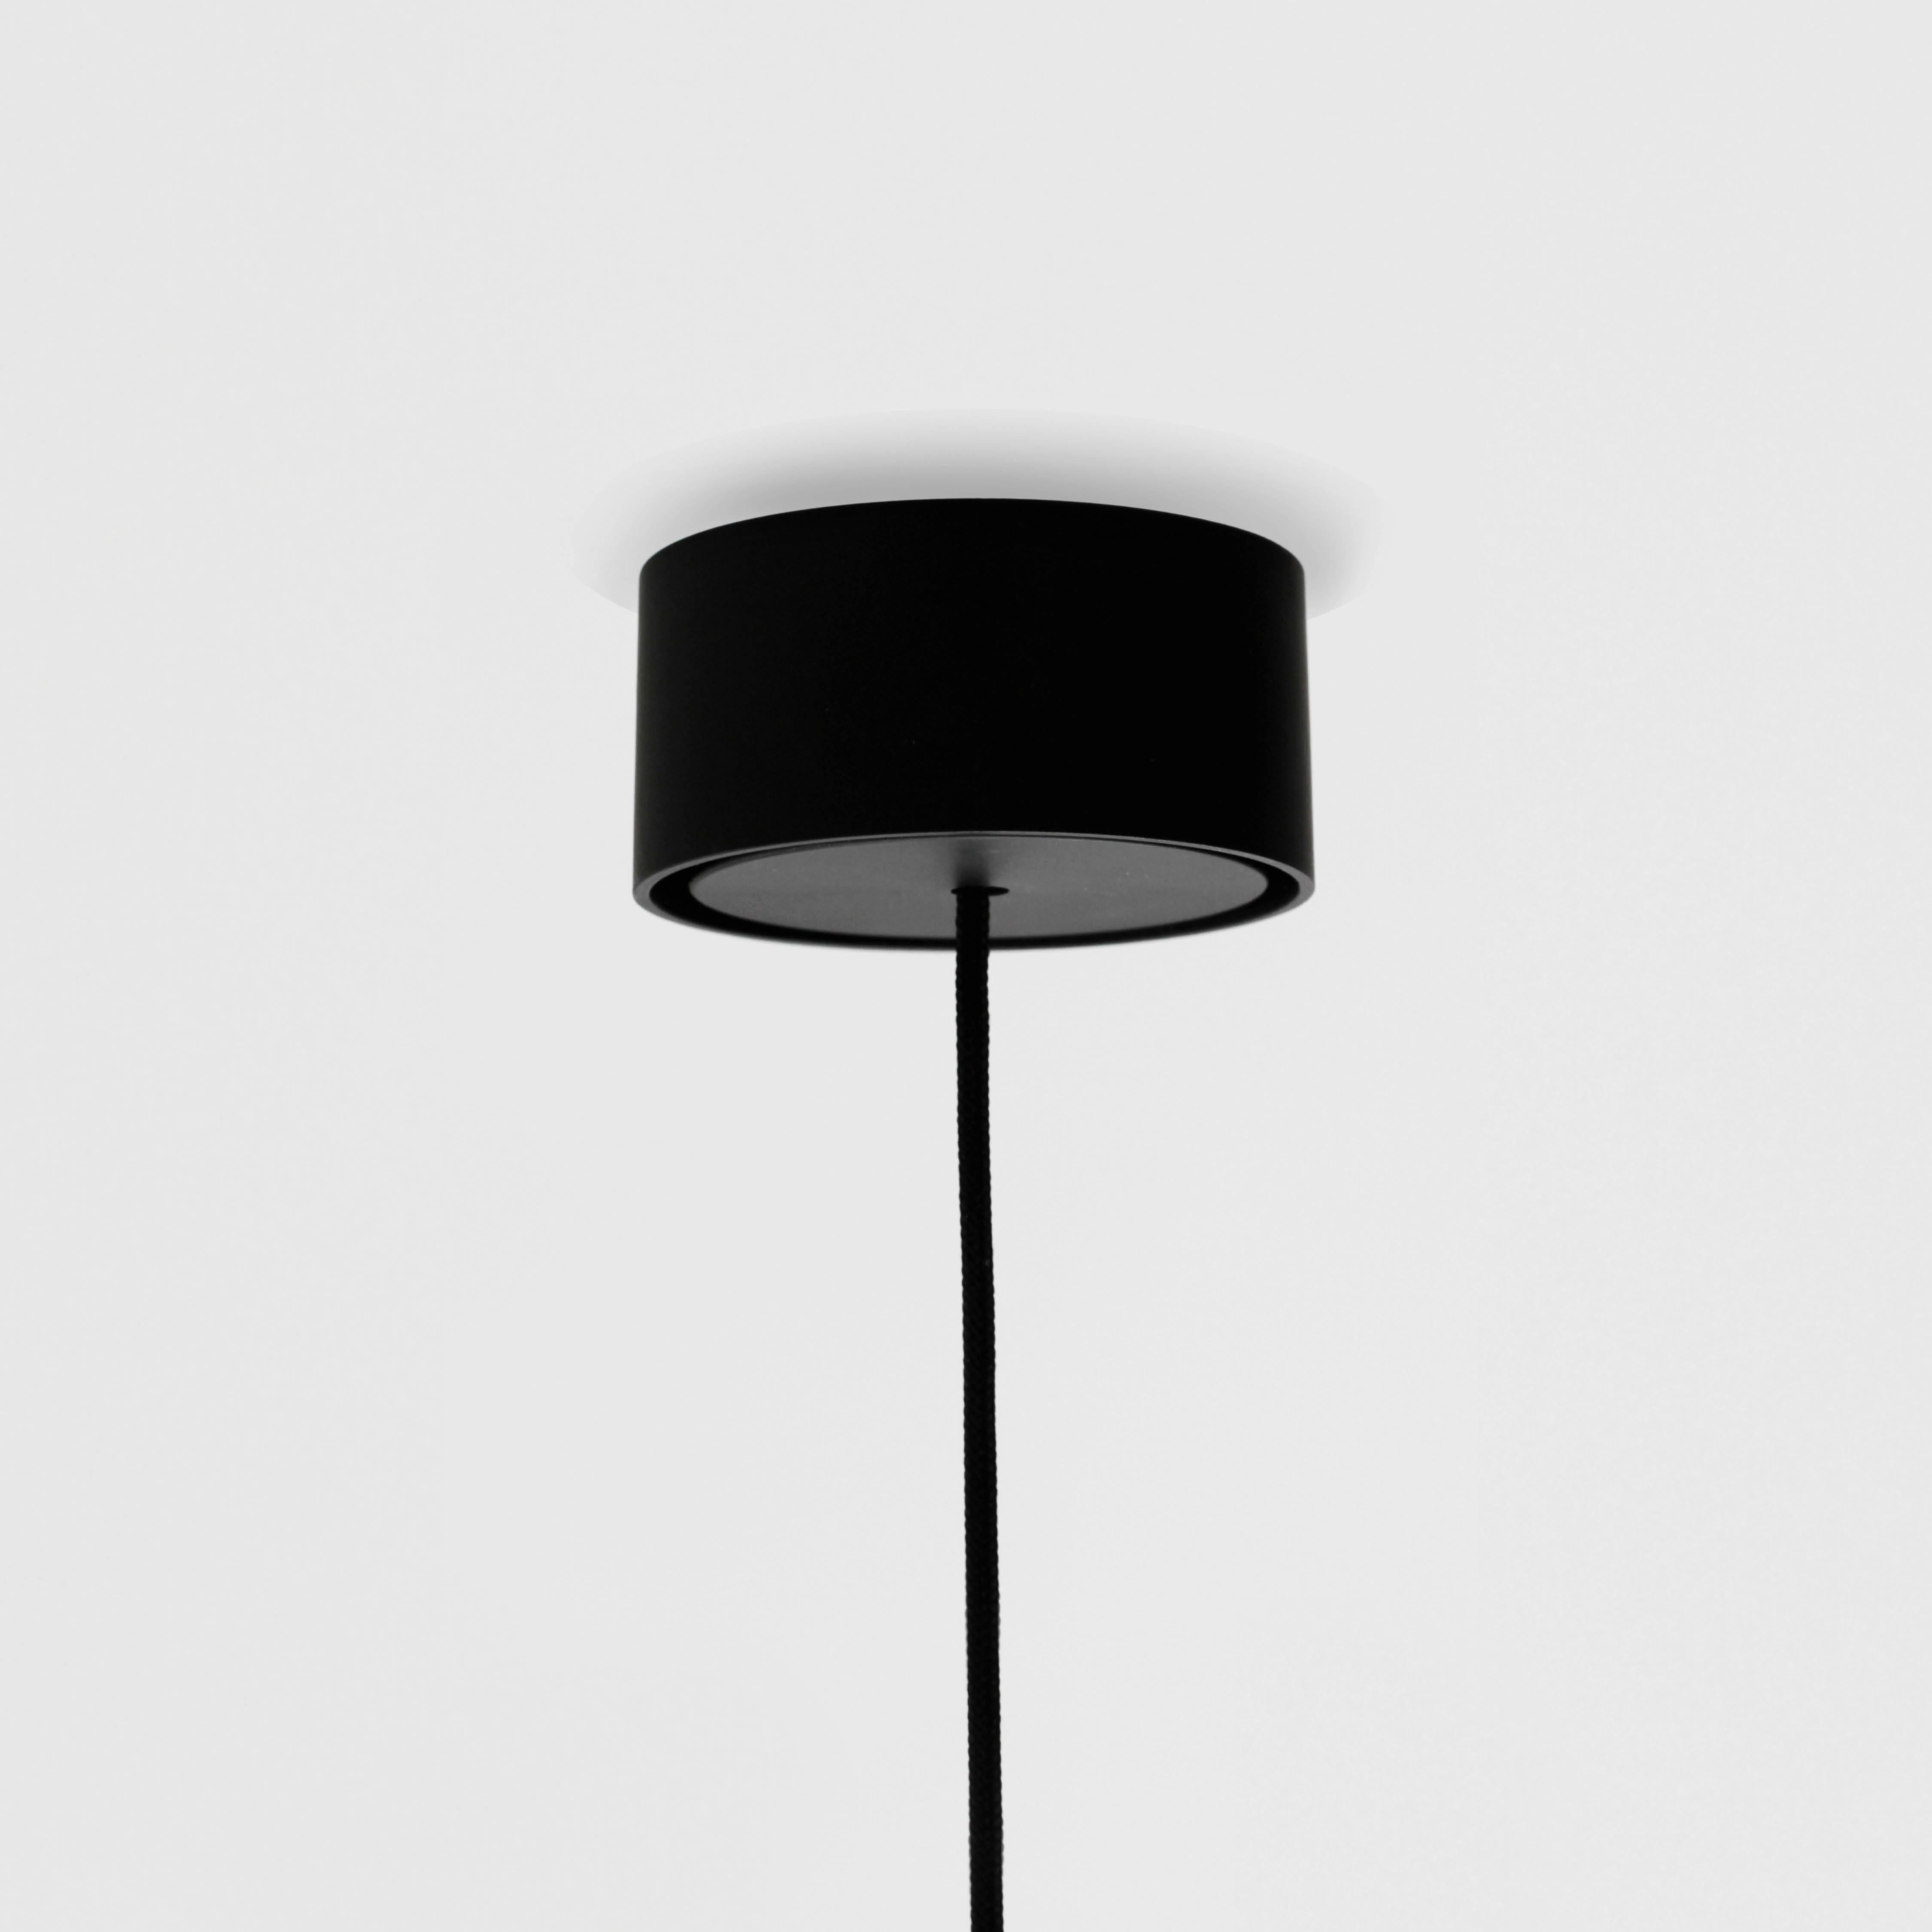 Formation Stick Pendant Light LED Minimalist Aluminum Fixture, Matte Black In New Condition For Sale In Broadmeadows, Victoria